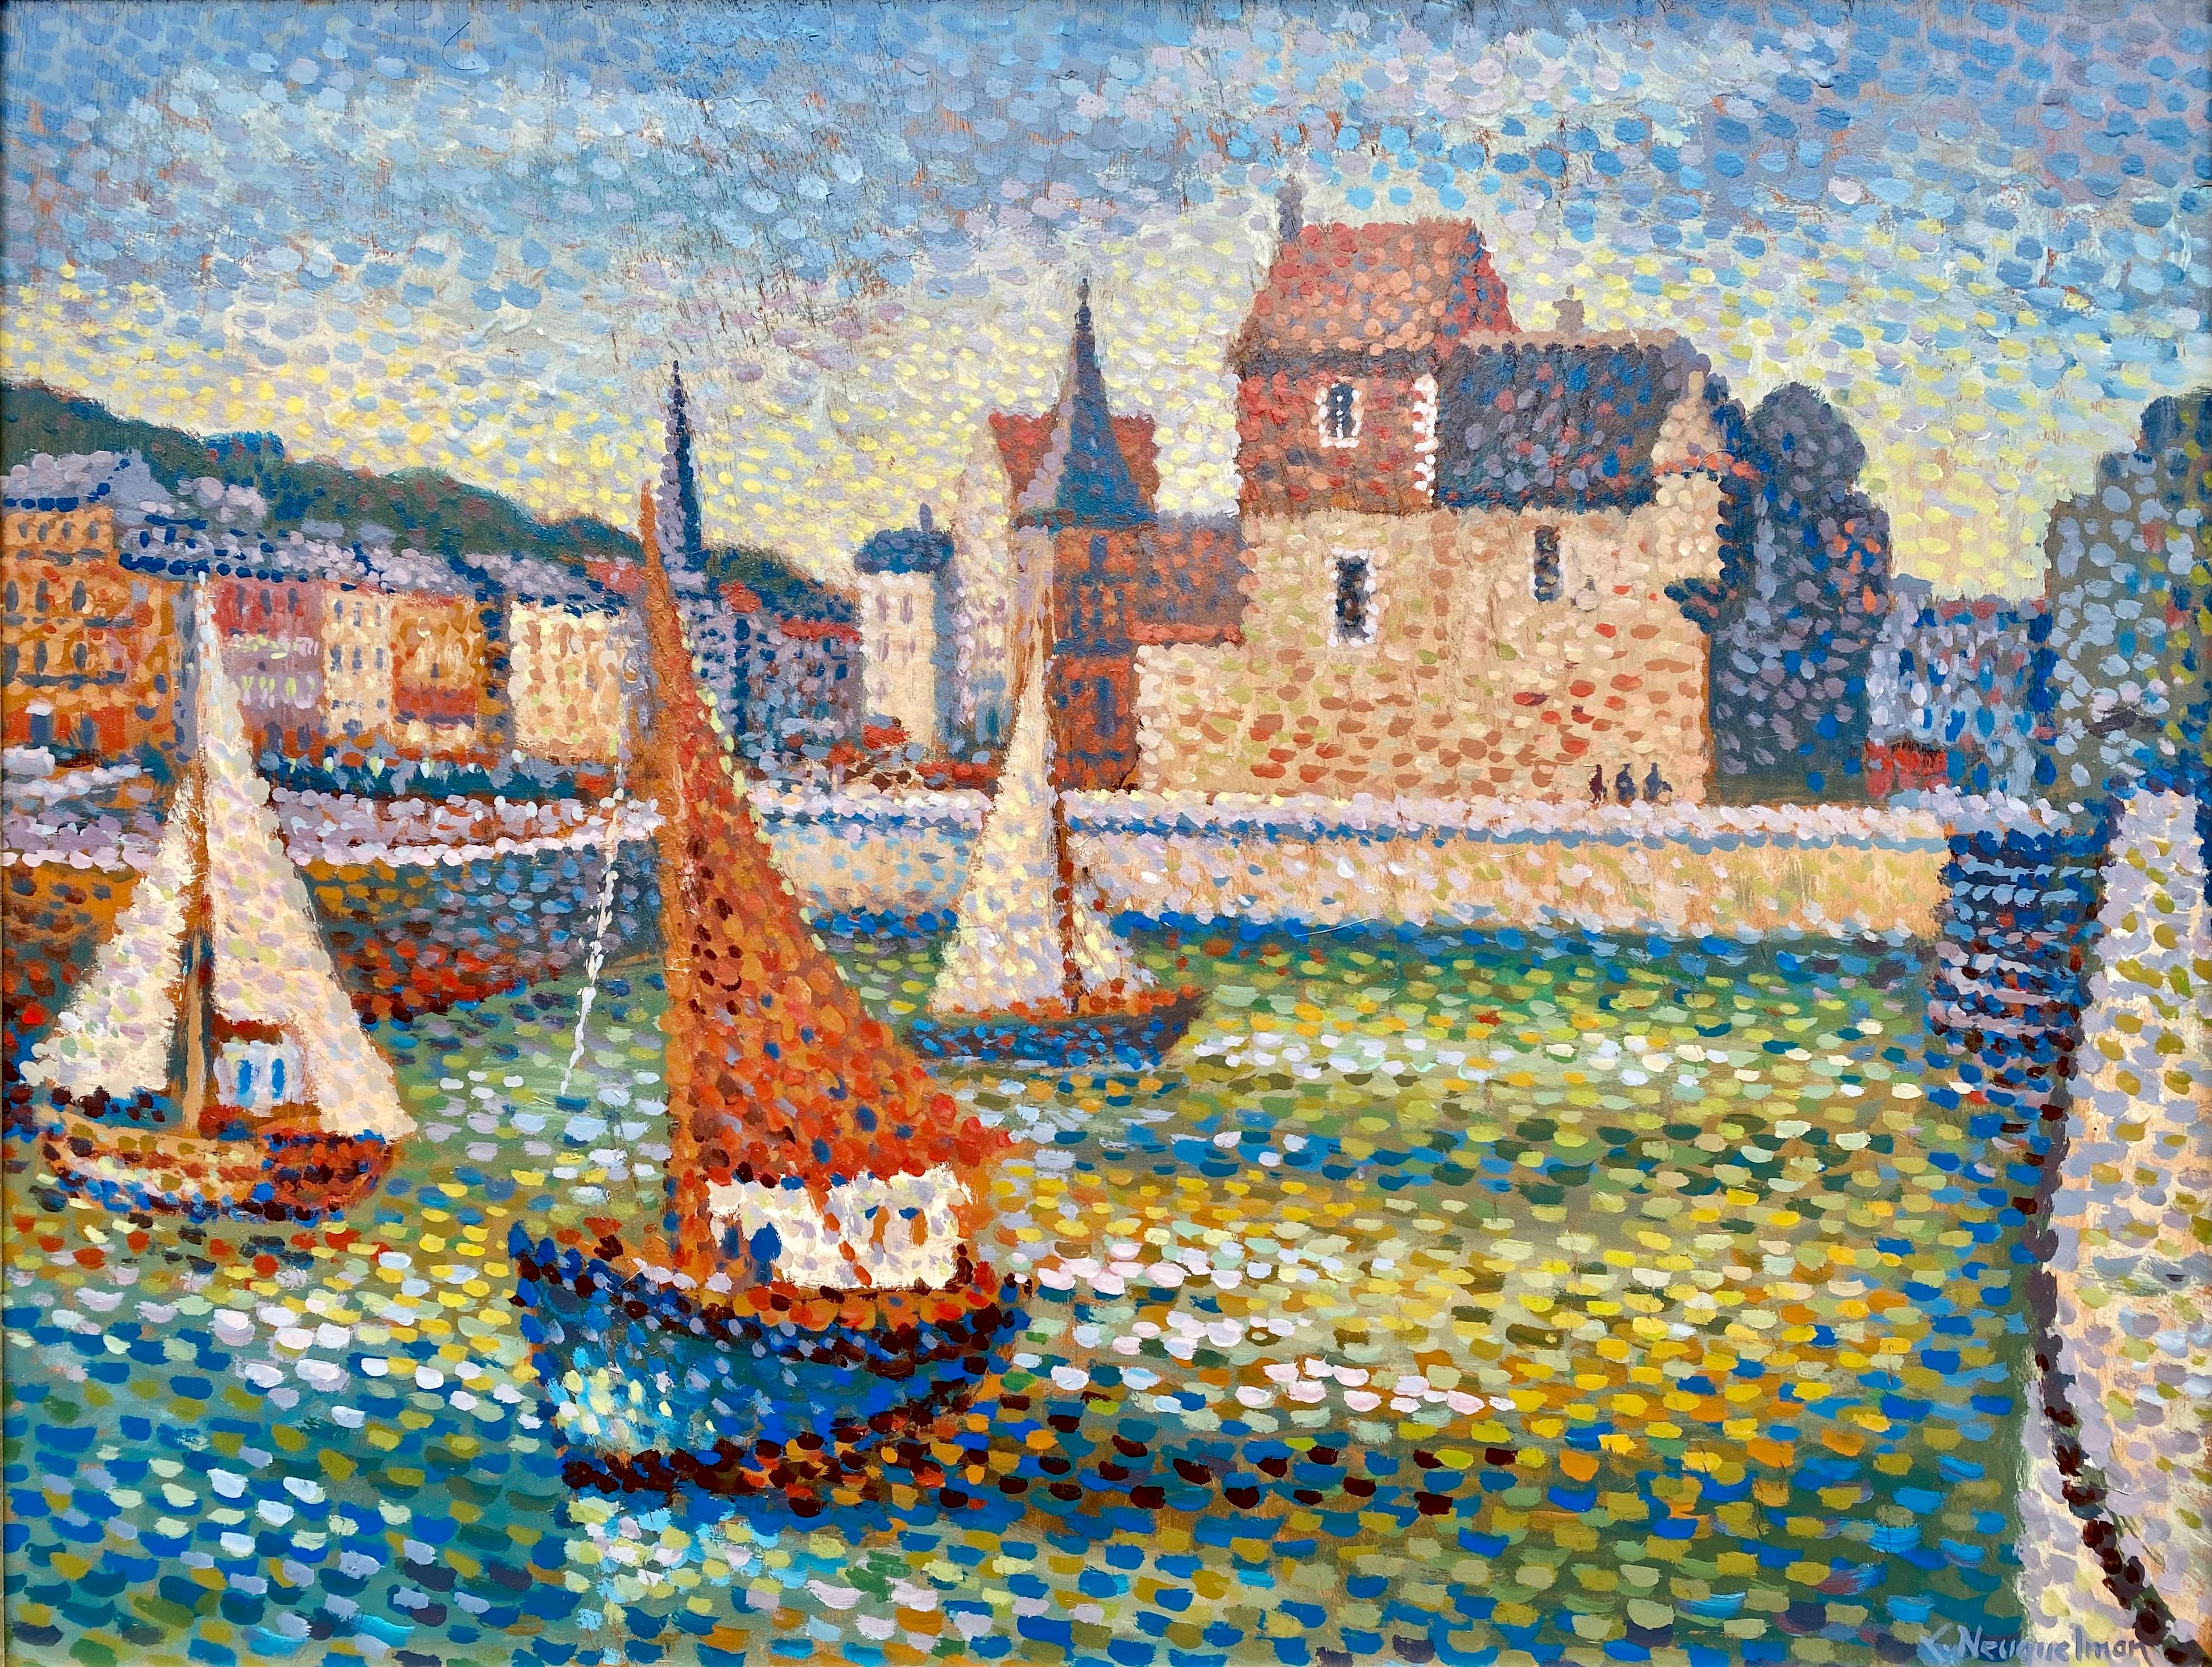 Neuquelman Lucien
Paris 1909 – 1988
French Painter

'Old Harbor of Honfleur - Normandy'
Signature: Signed bottom right
Medium: Oil on board
Dimensions: Image size 50 x 65 cm, frame size 59 x 74 cm

Biography: Neuquelman Lucien was born on February